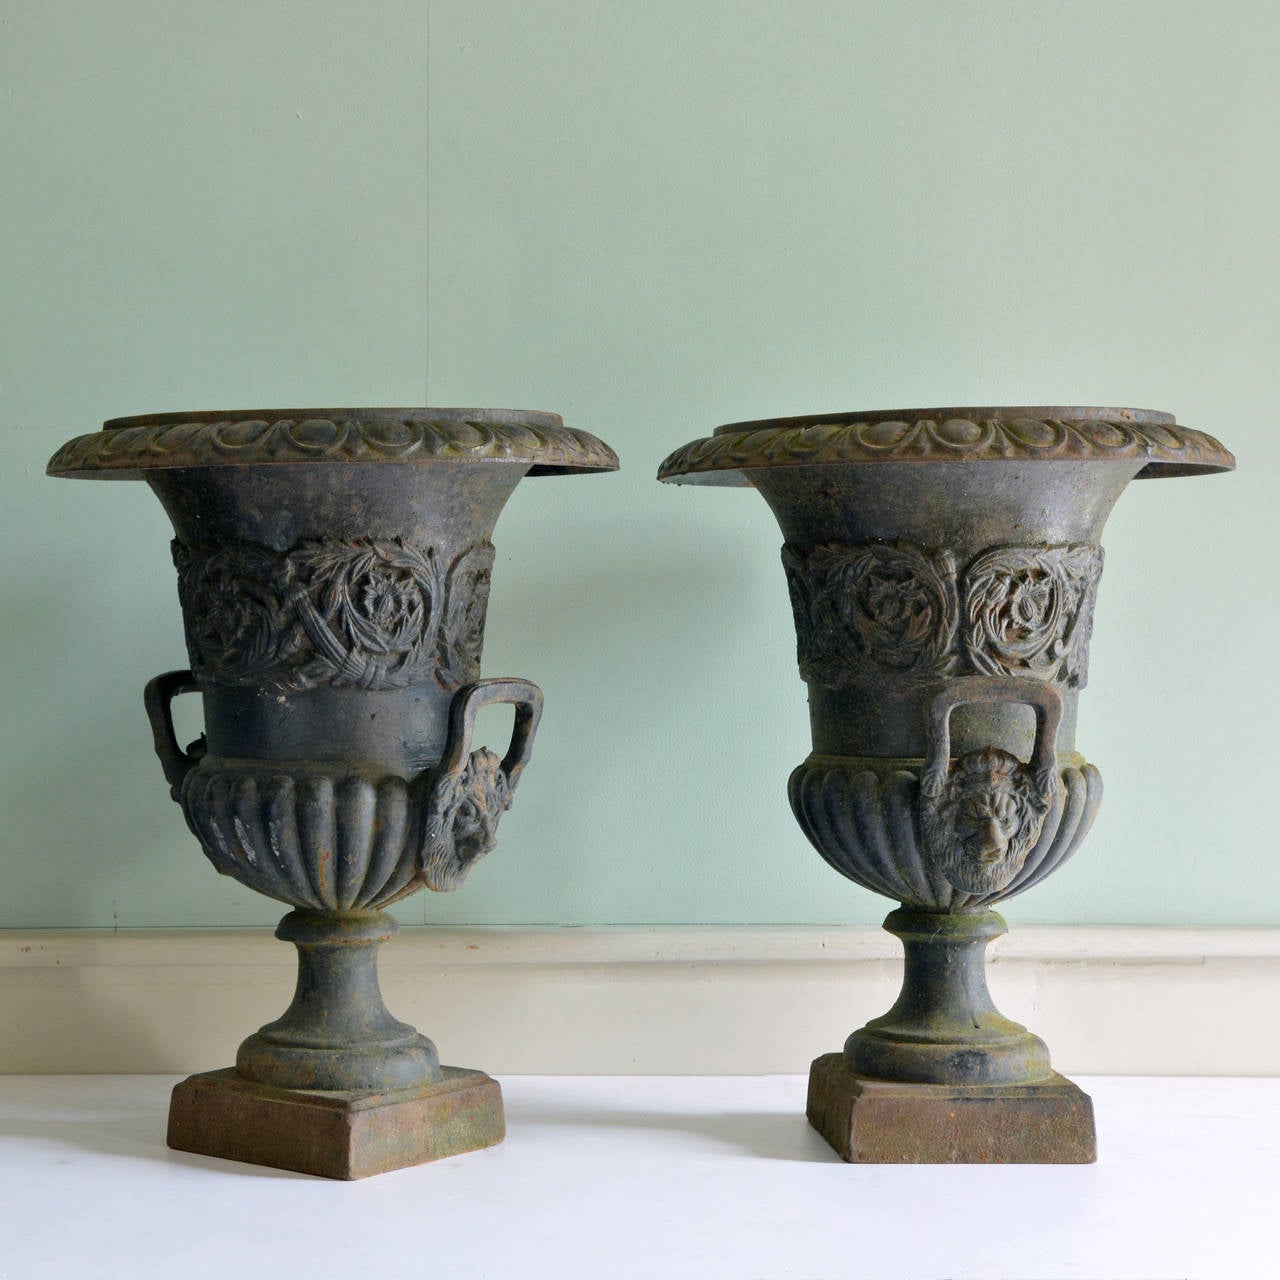 A pair of Victorian style cast iron urns, in the manner of the Handyside foundry,
the egg and dart moulded rims above body with typical foliate casting, the gadrooned bodies with lion mask handles on socle and square plinth bases. 

Available to